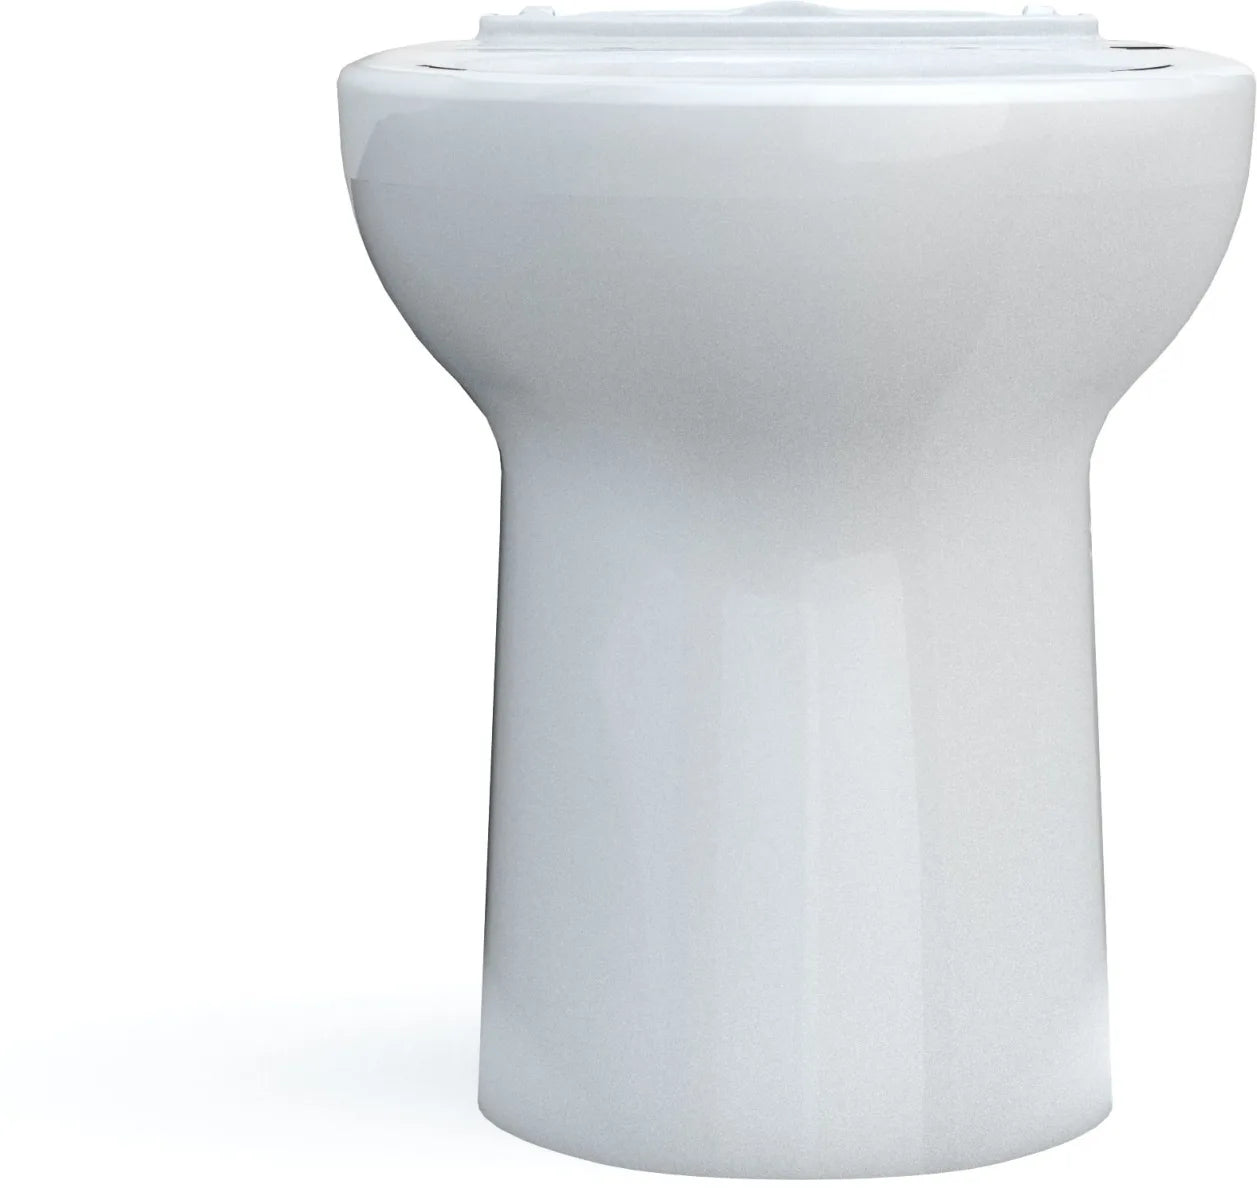 Toto Drake Elongated UnIVersal Height Bowl Only (Washlet+ Compatible) - C776CEGT40#01